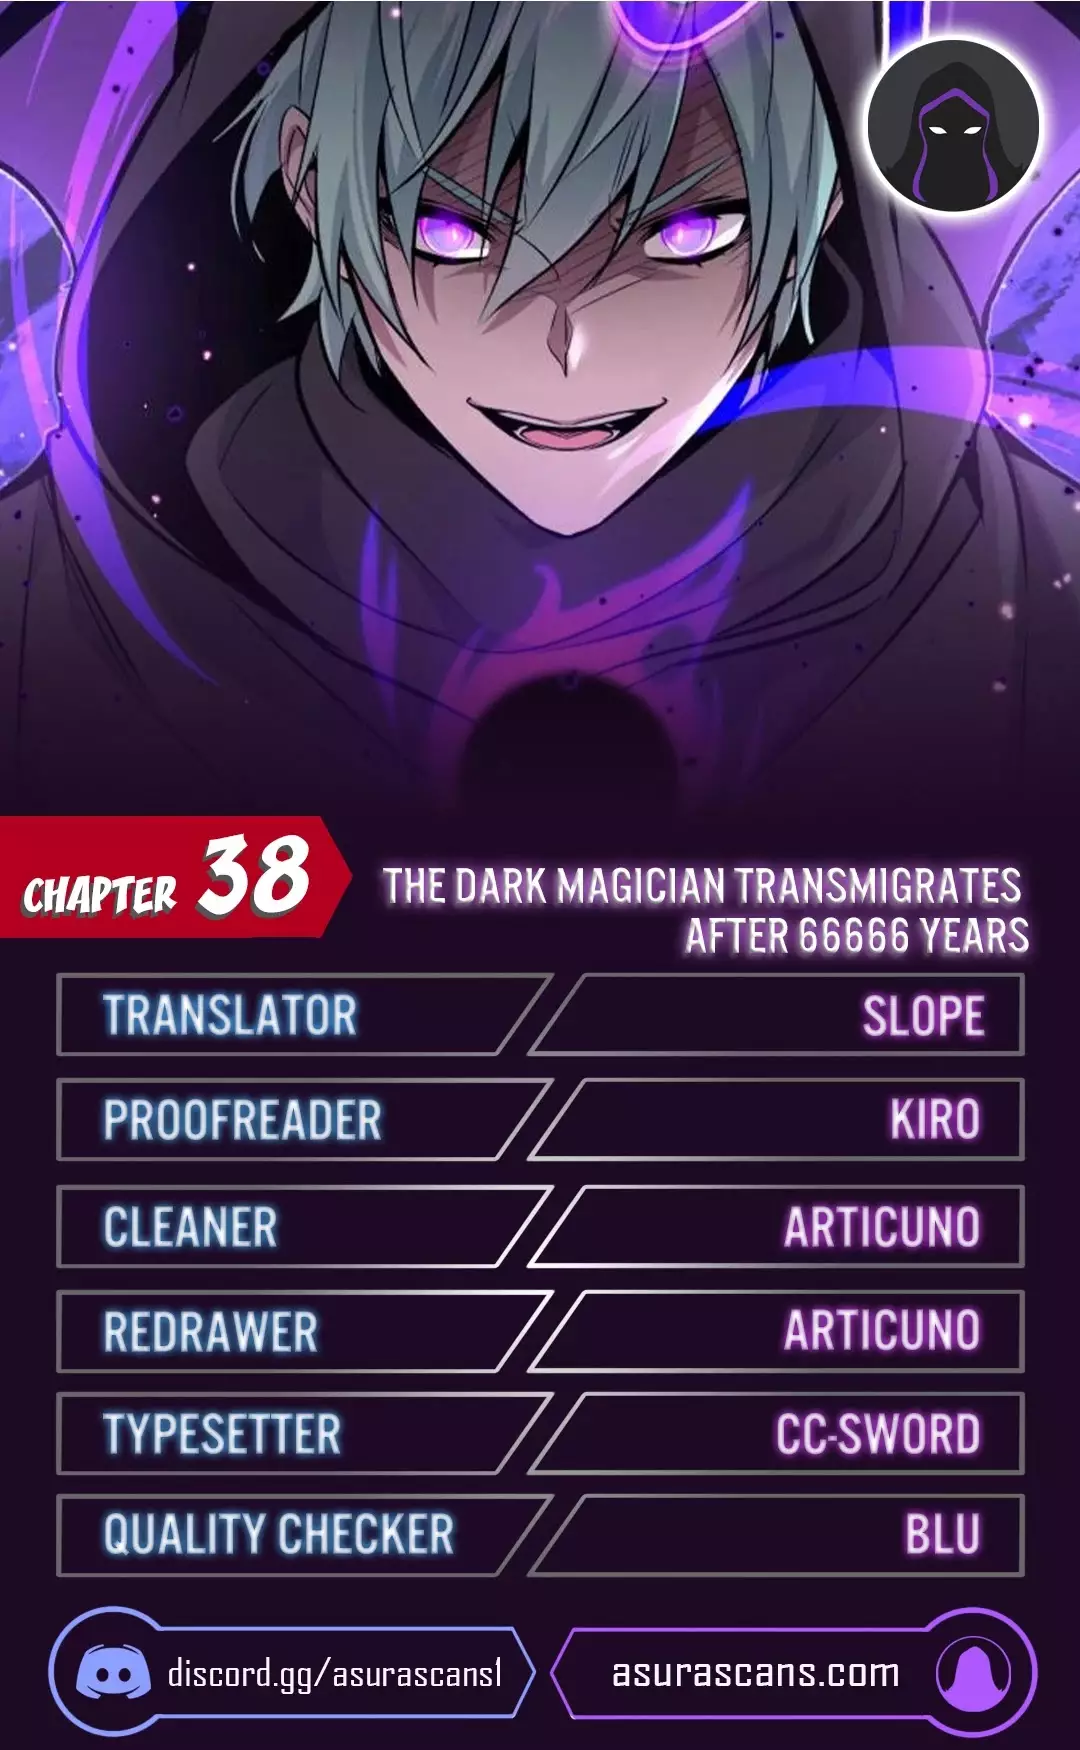 The Dark Magician Transmigrates After 66666 Years - 38 page 1-53d3b6d1